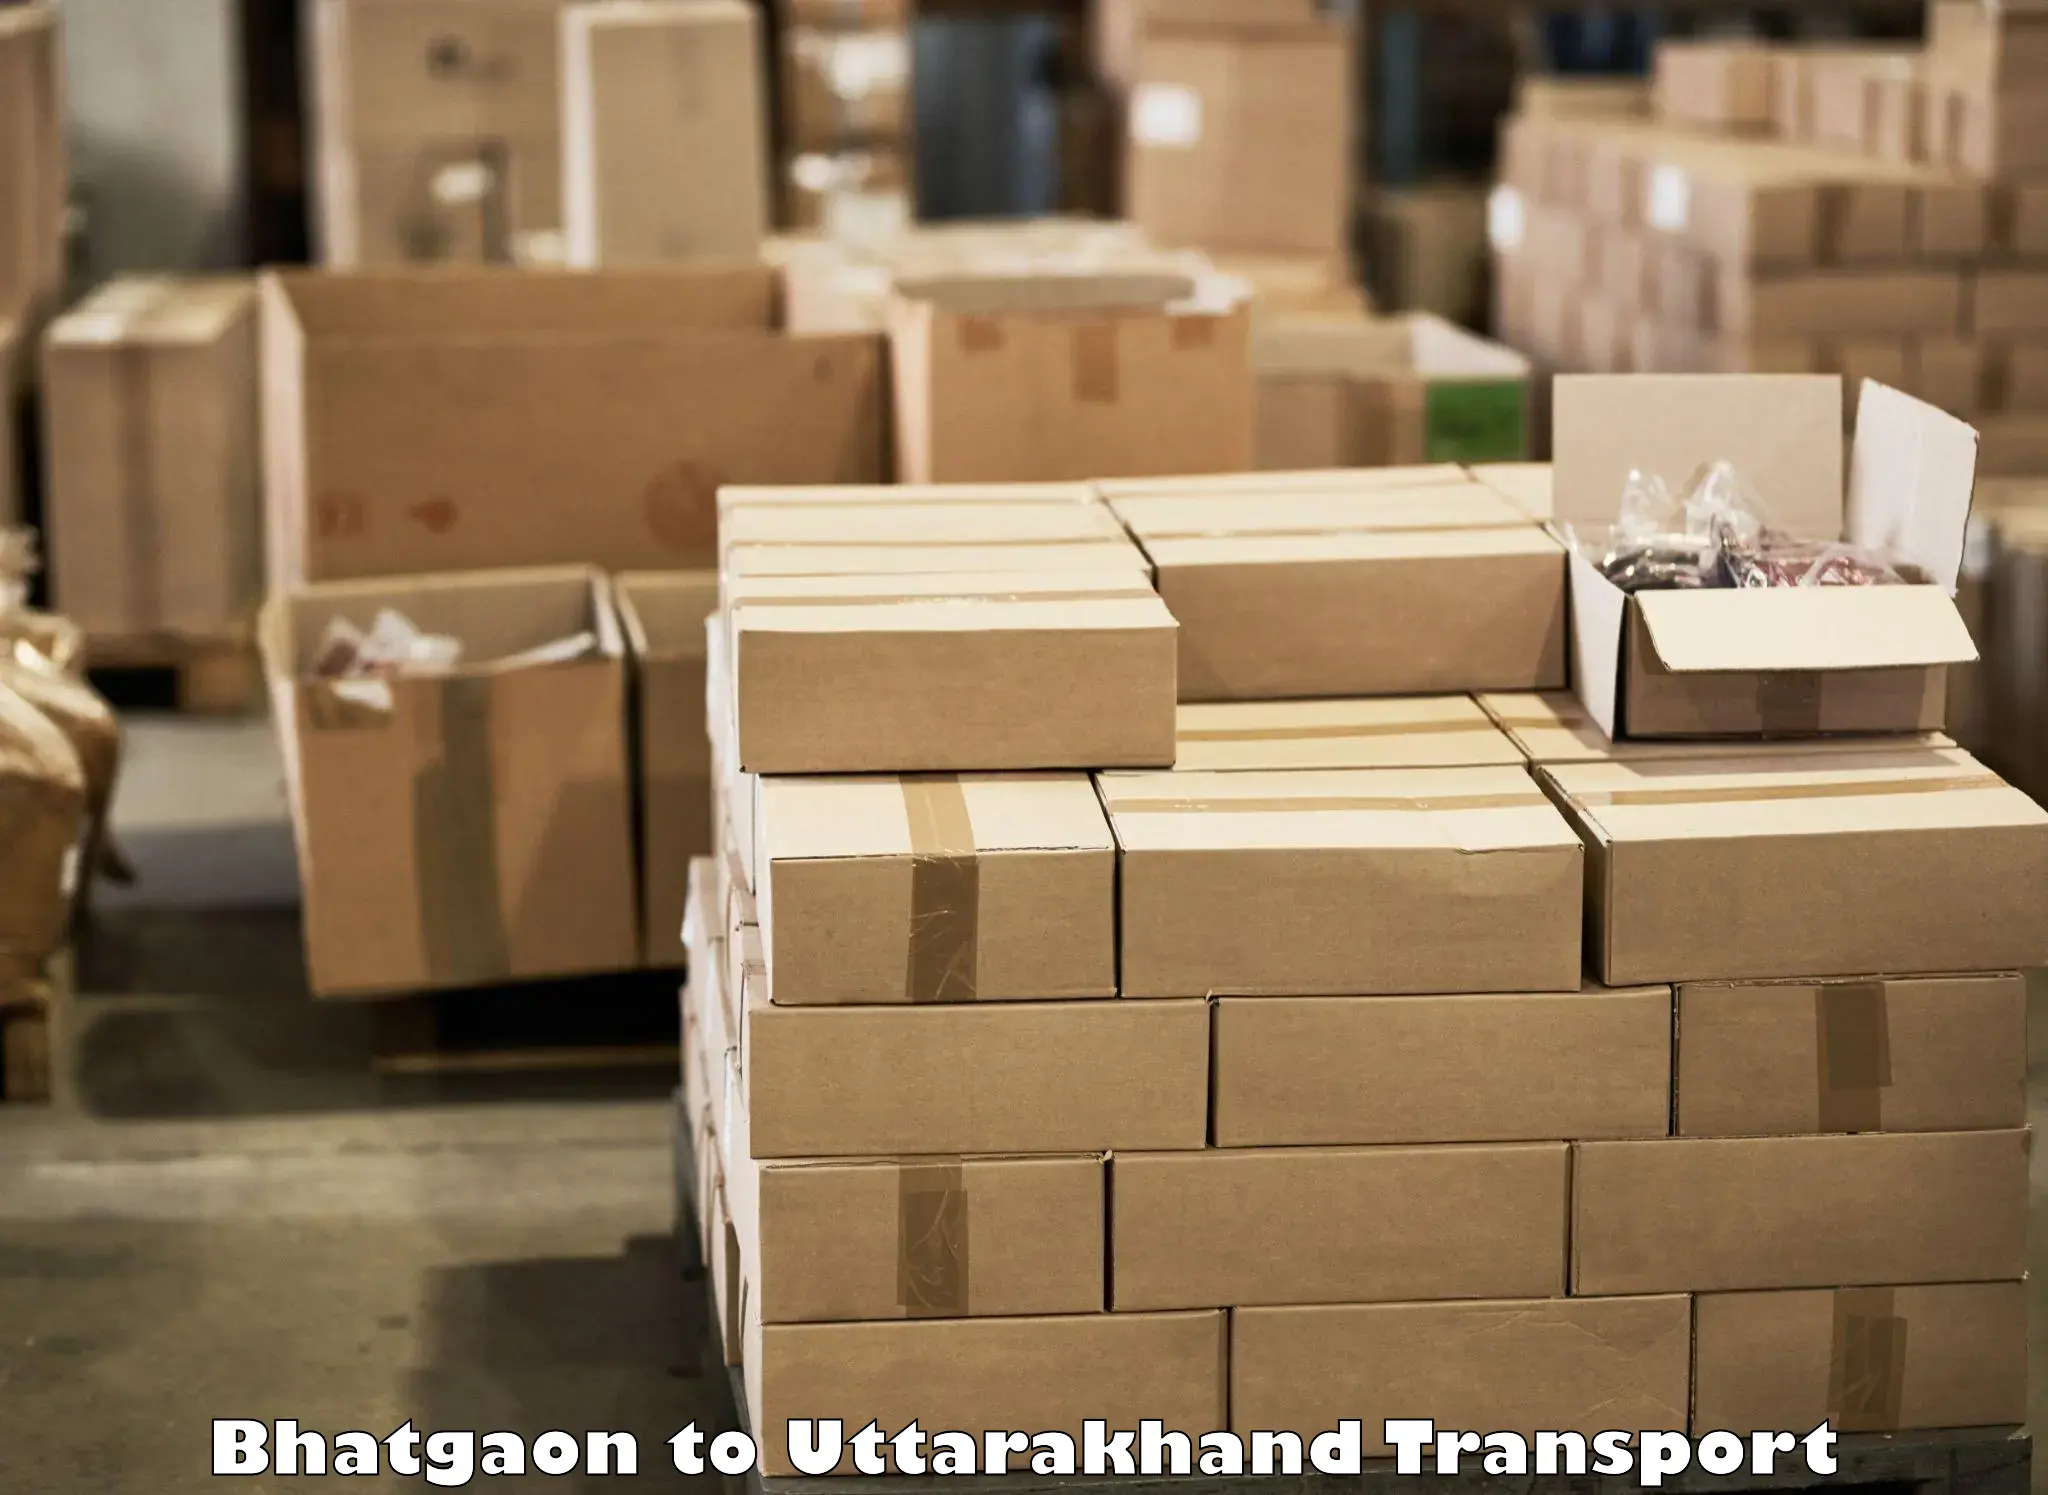 Vehicle transport services in Bhatgaon to Tehri